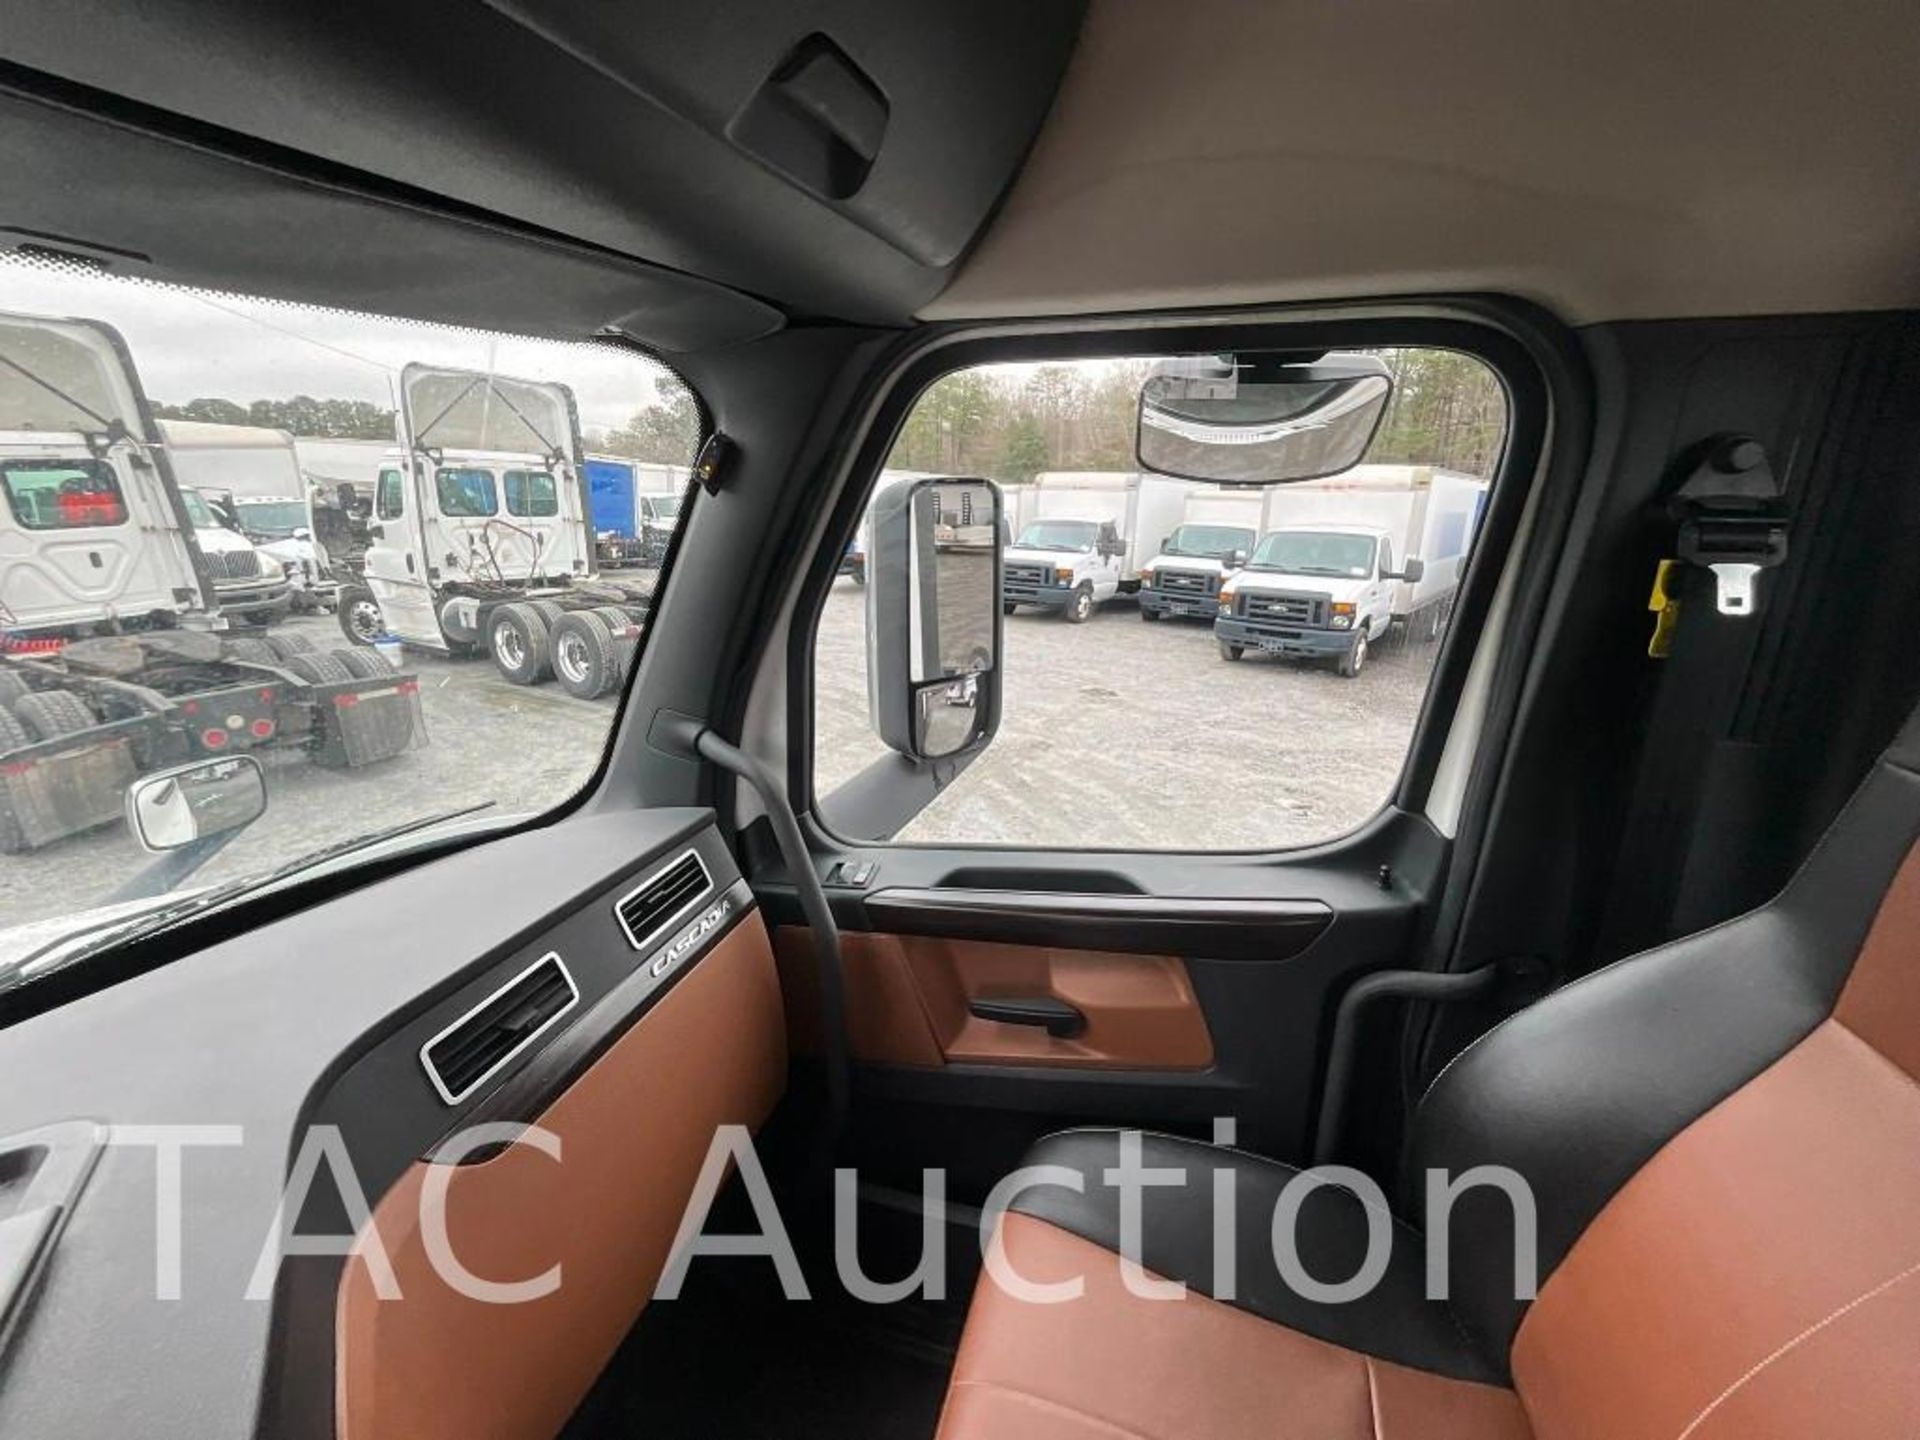 2019 Freightliner Cascadia Day Cab - Image 19 of 54